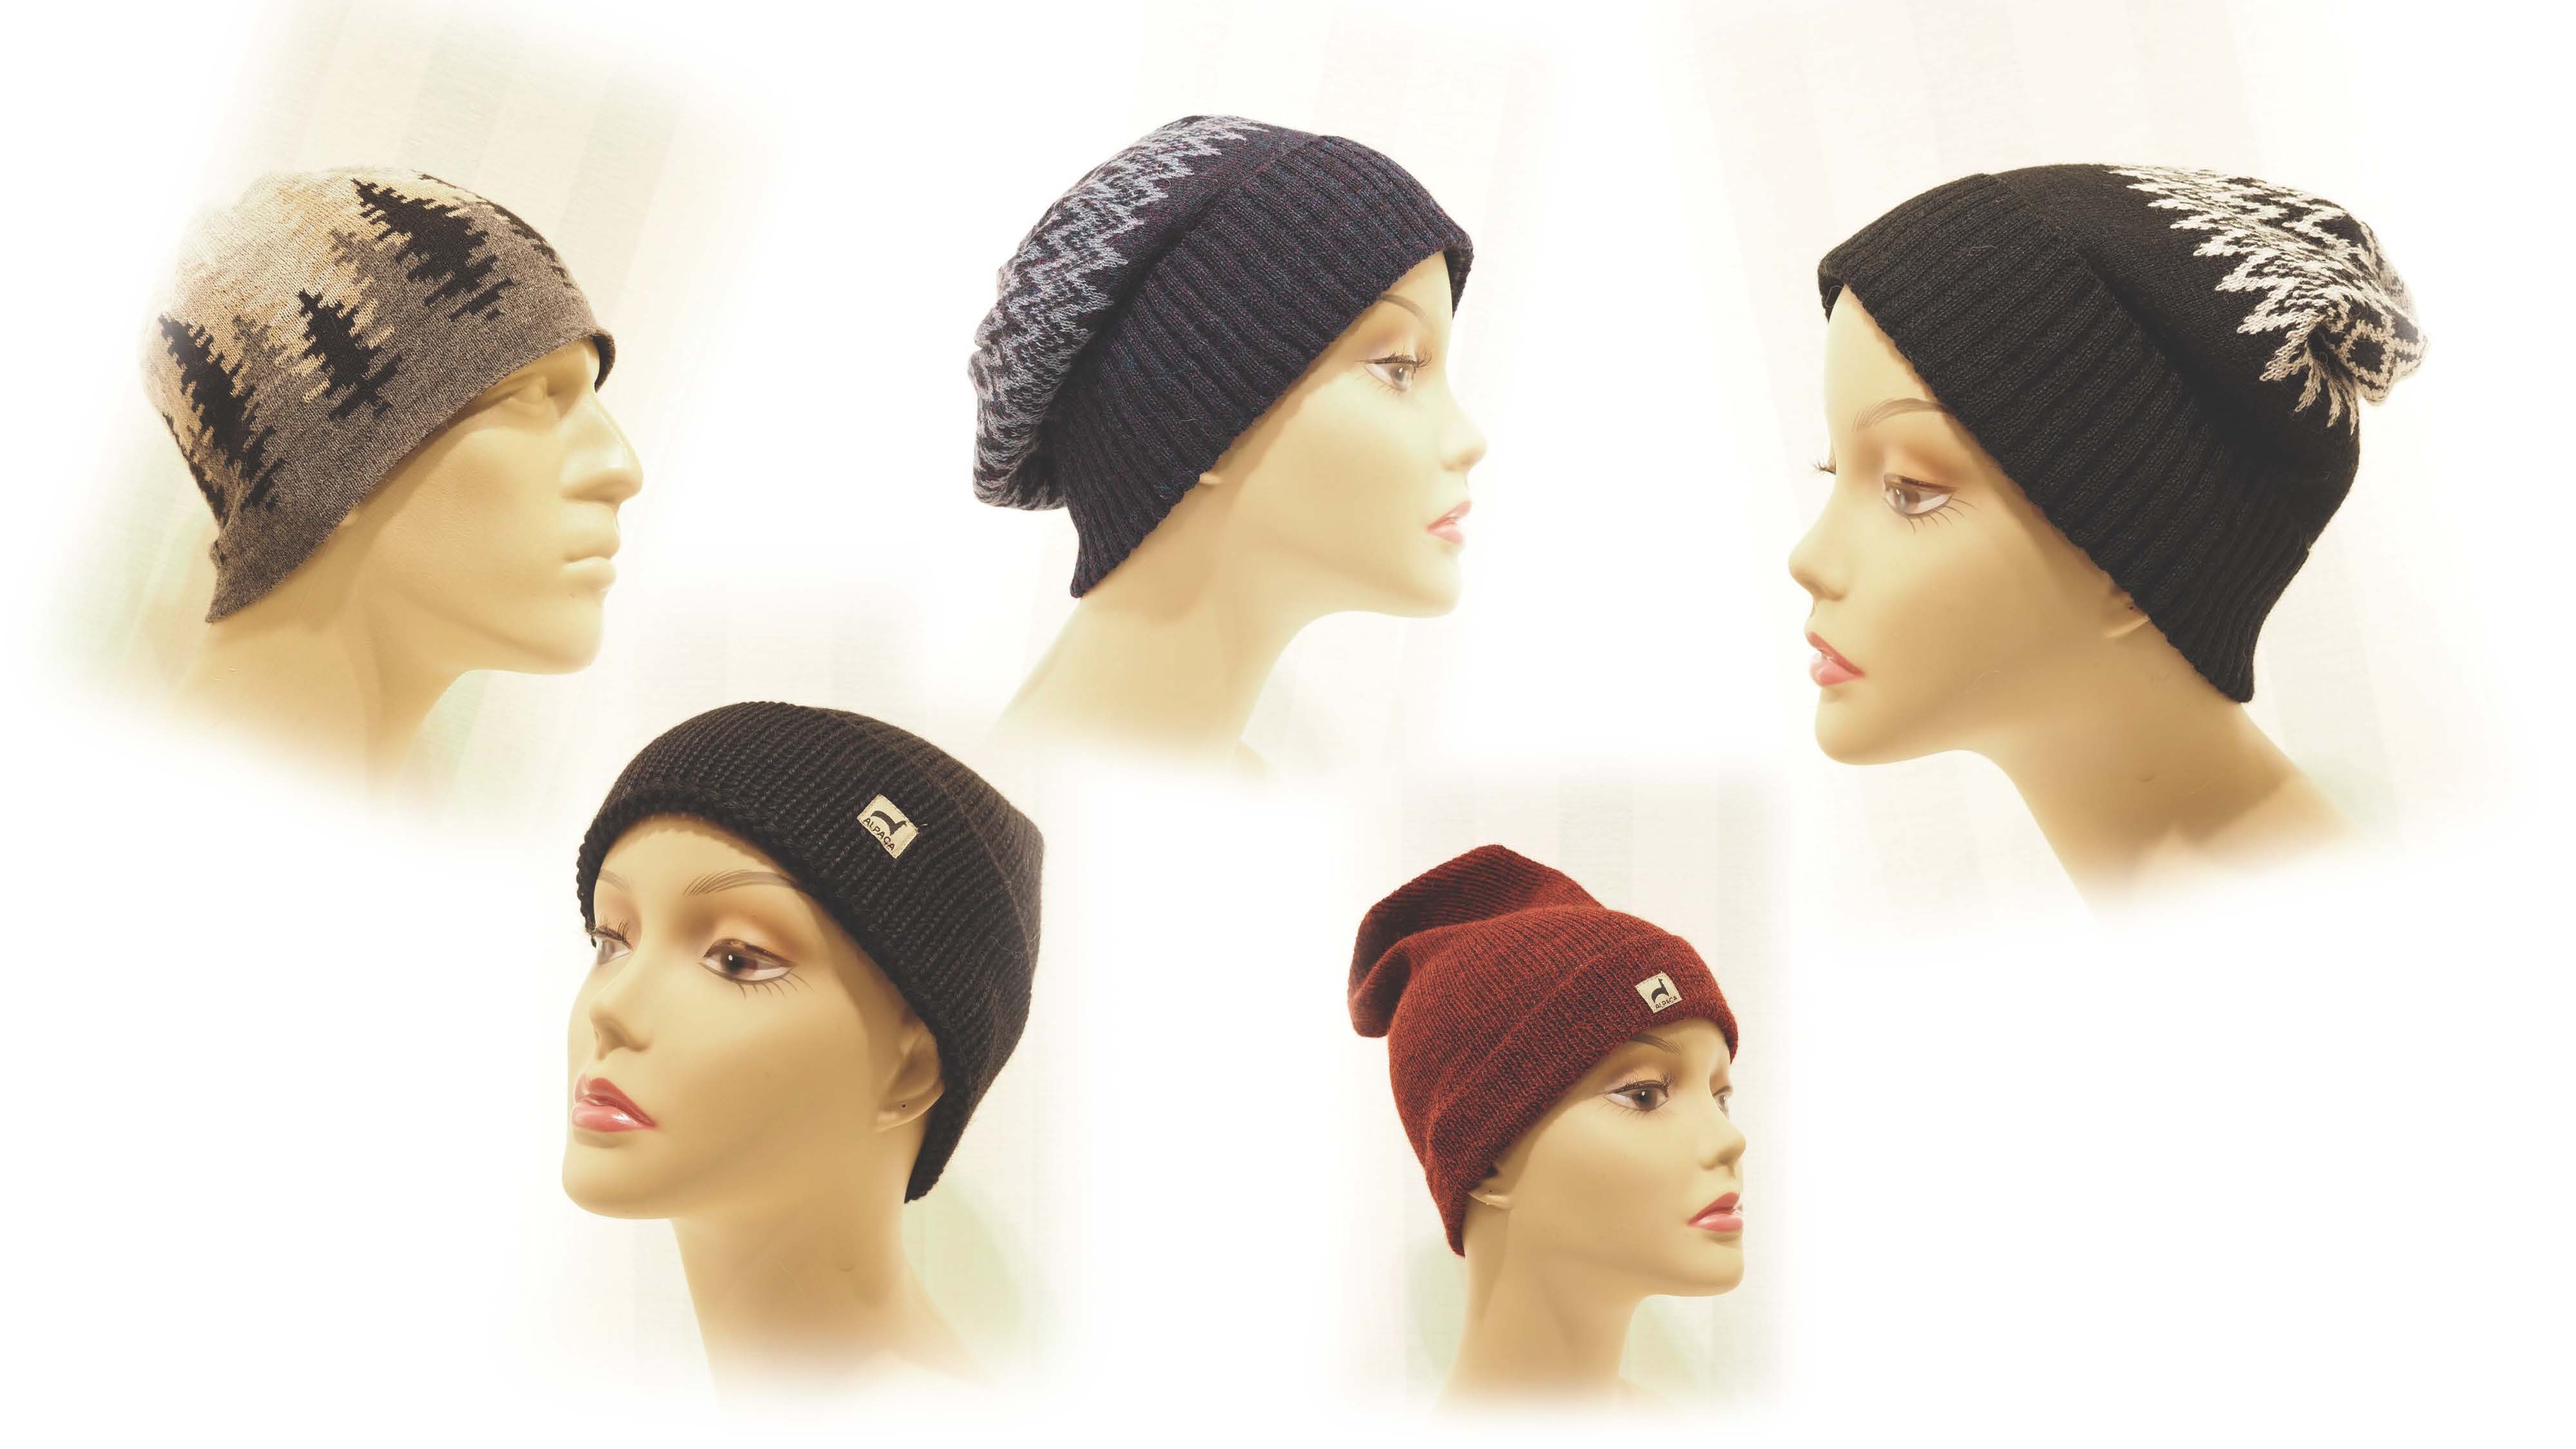 10% off beanies and hats from Sheepskin & Alpaca Specialties